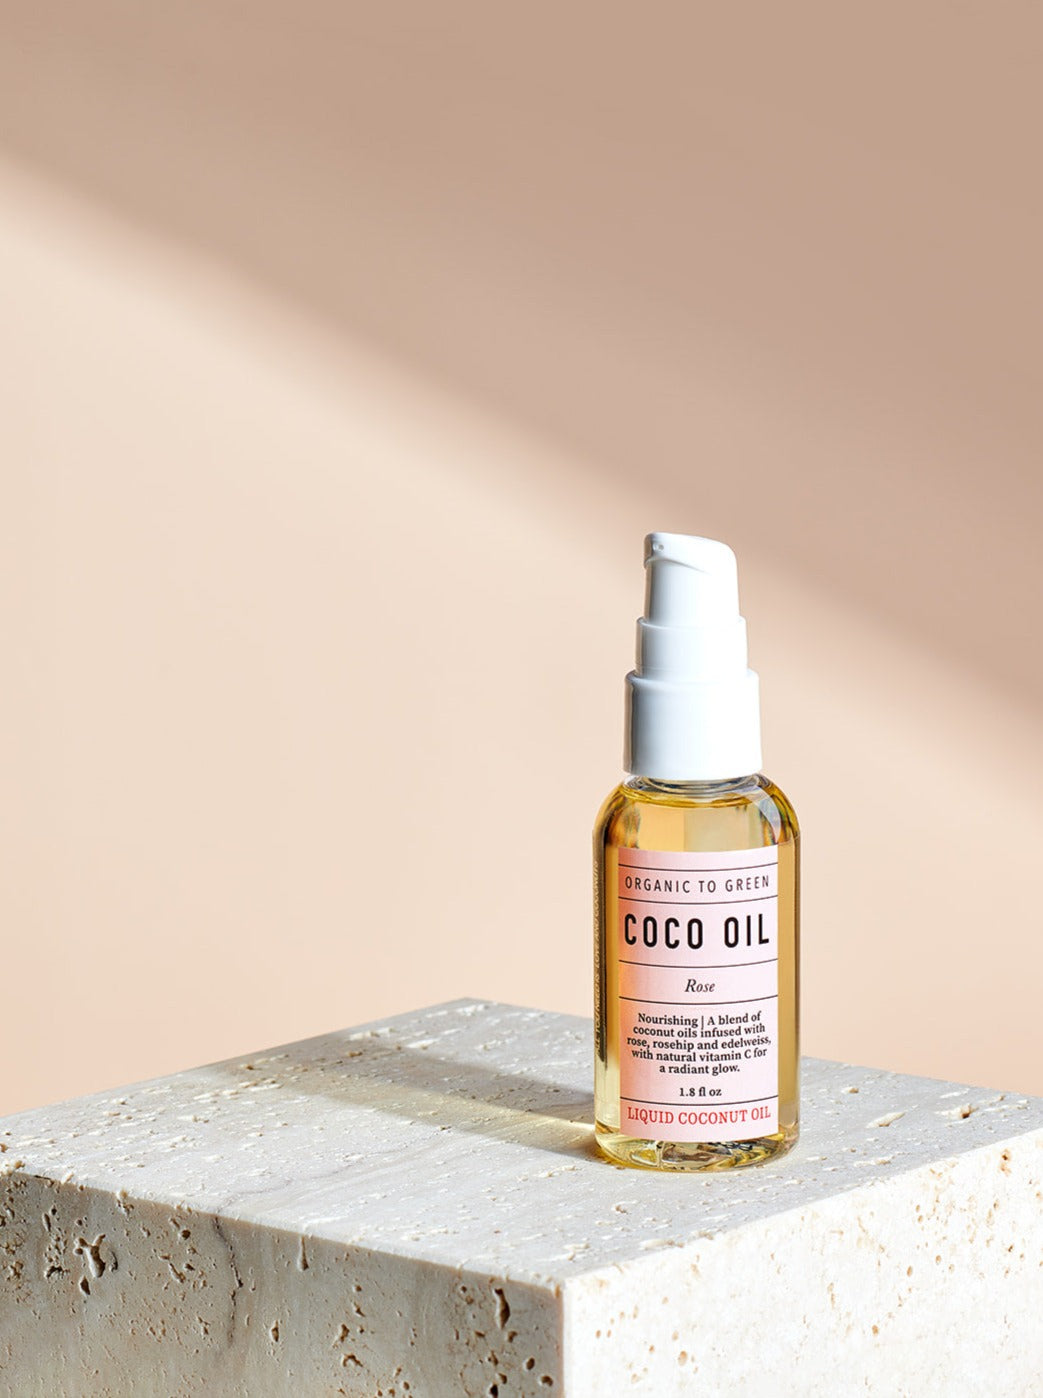 The Ultimate Clean Beauty Face Kit, Rose Glow Serum